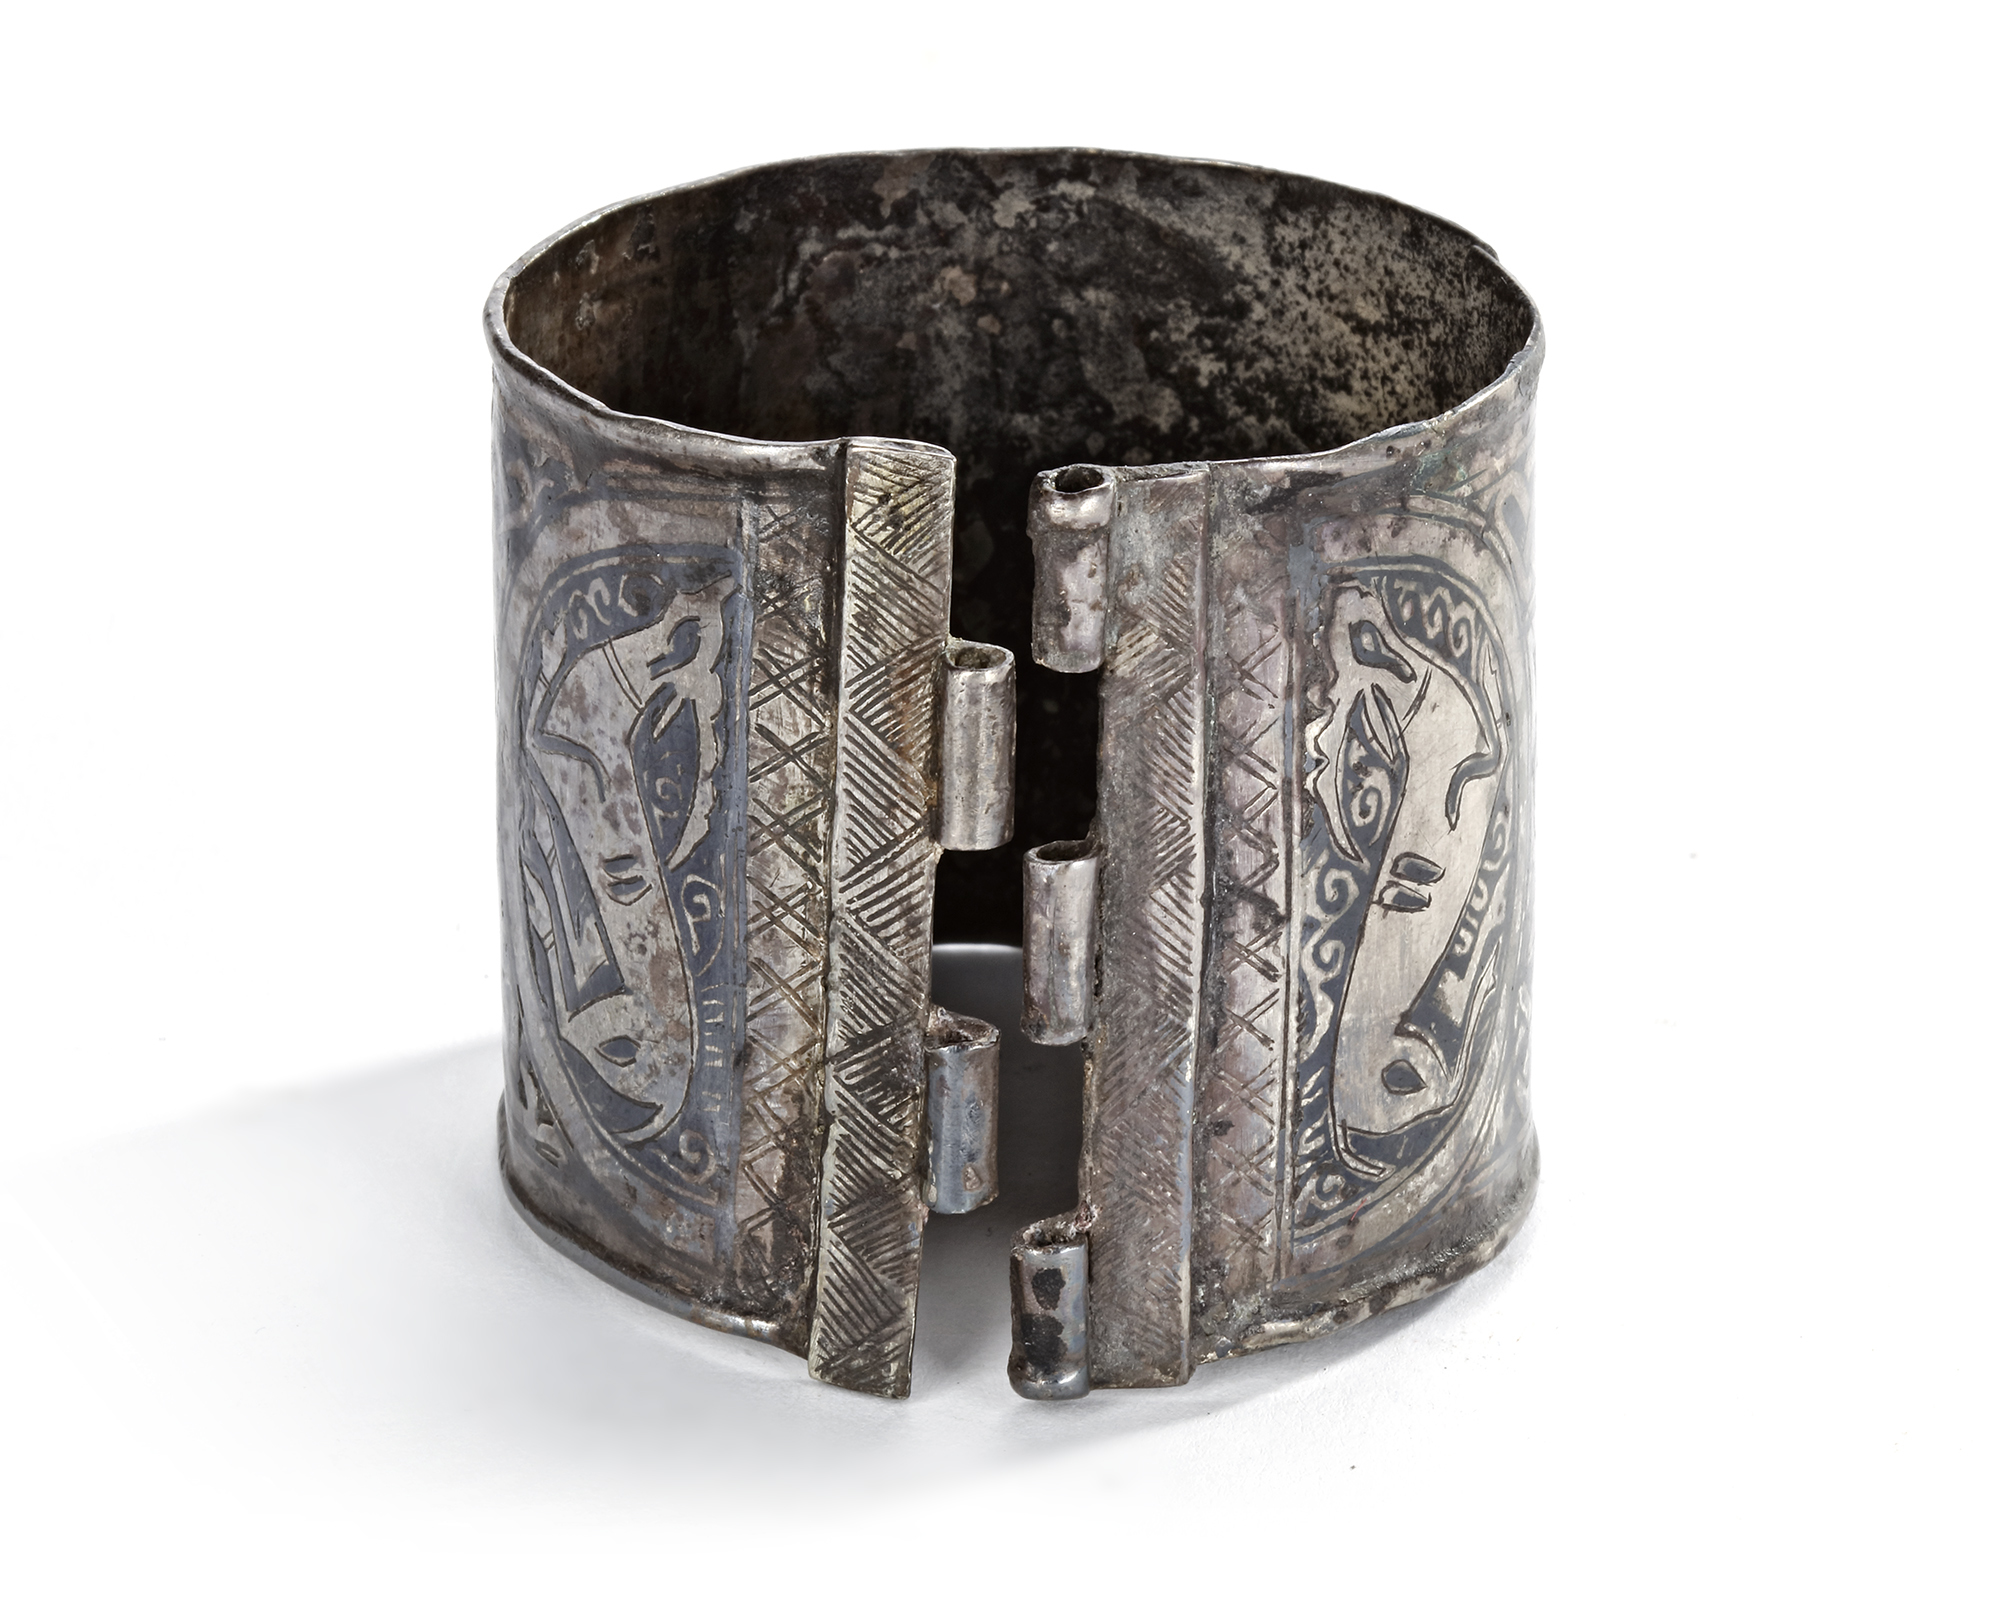 A SILVER AND NIELLO BRACELET WITH KUFIC INSCRIPTION, 11TH-12TH CENTURY - Image 5 of 6